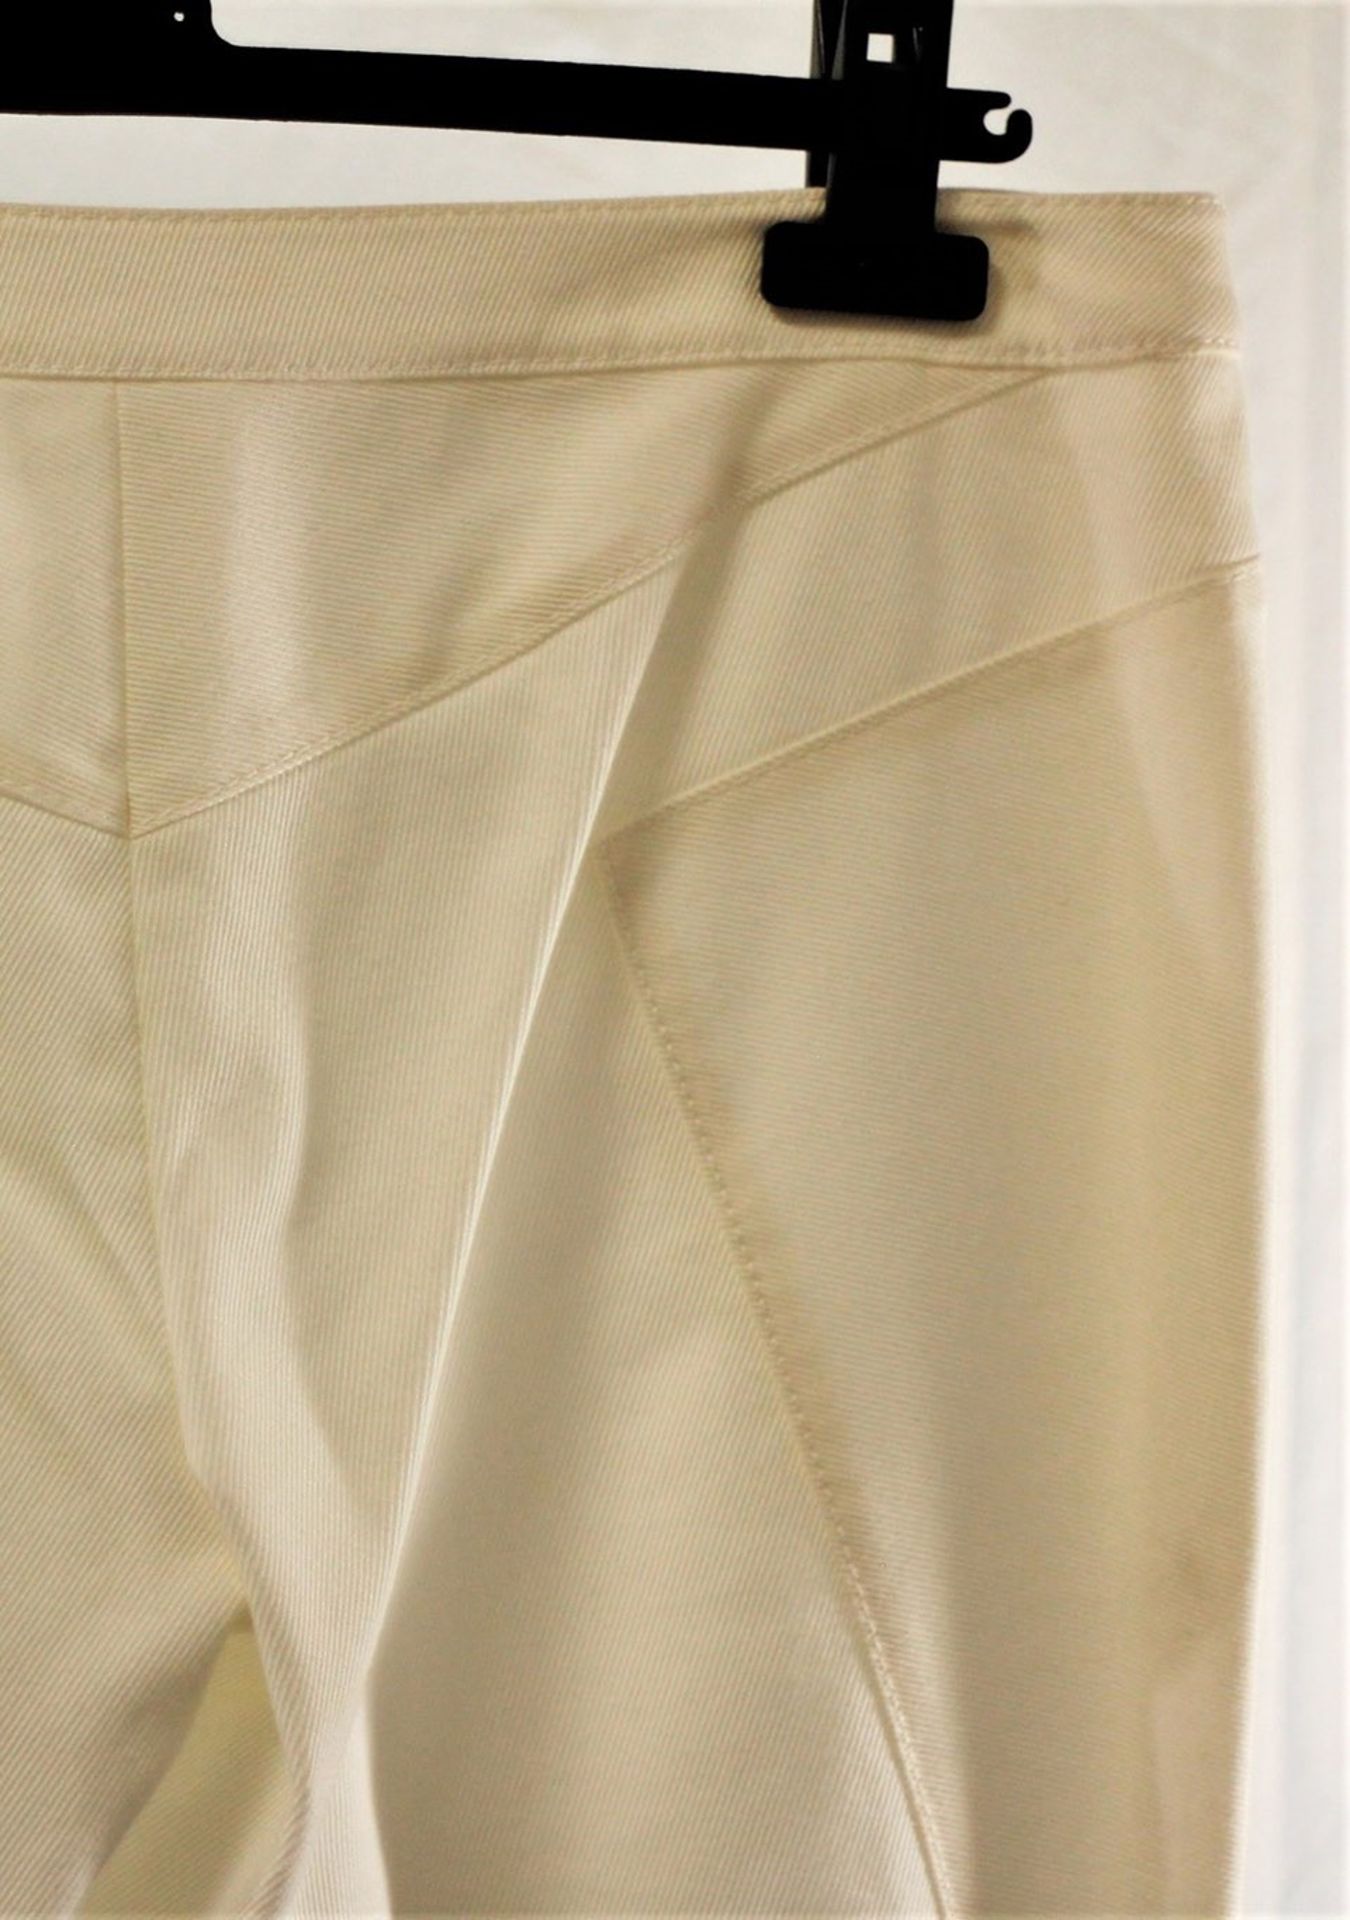 1 x Valentino Cream Trousers - Size: 14 - Material: 98% Cotton, 2% Elastane. Lining 100% Polyester - - Image 5 of 5